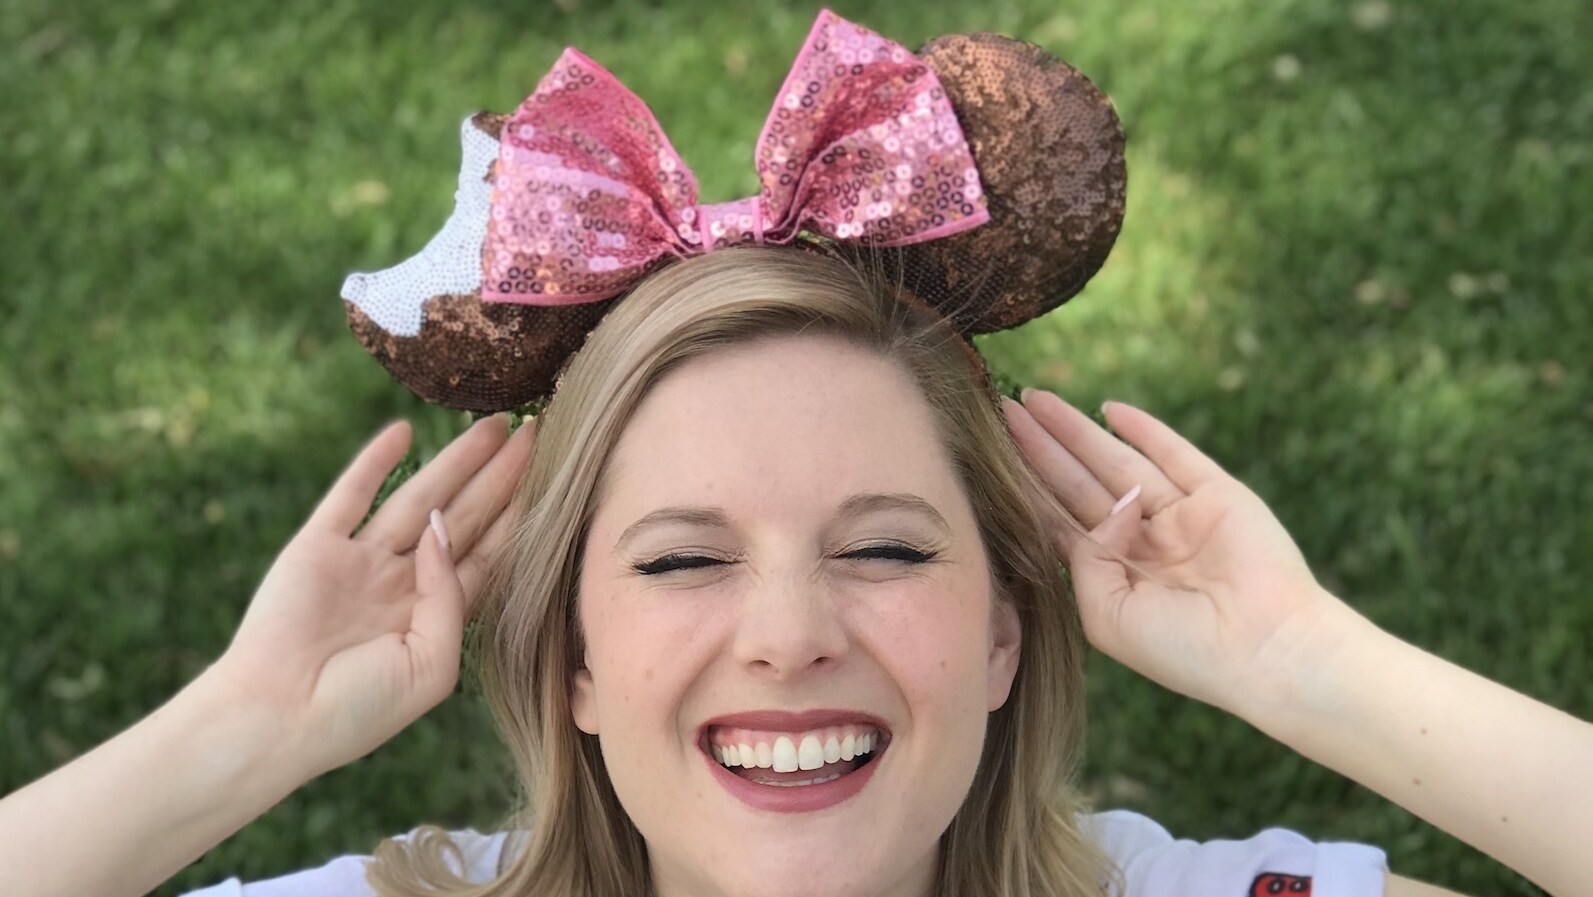 Your Favorite Disney Parks Treat Is Now The Latest Must-Have Ears